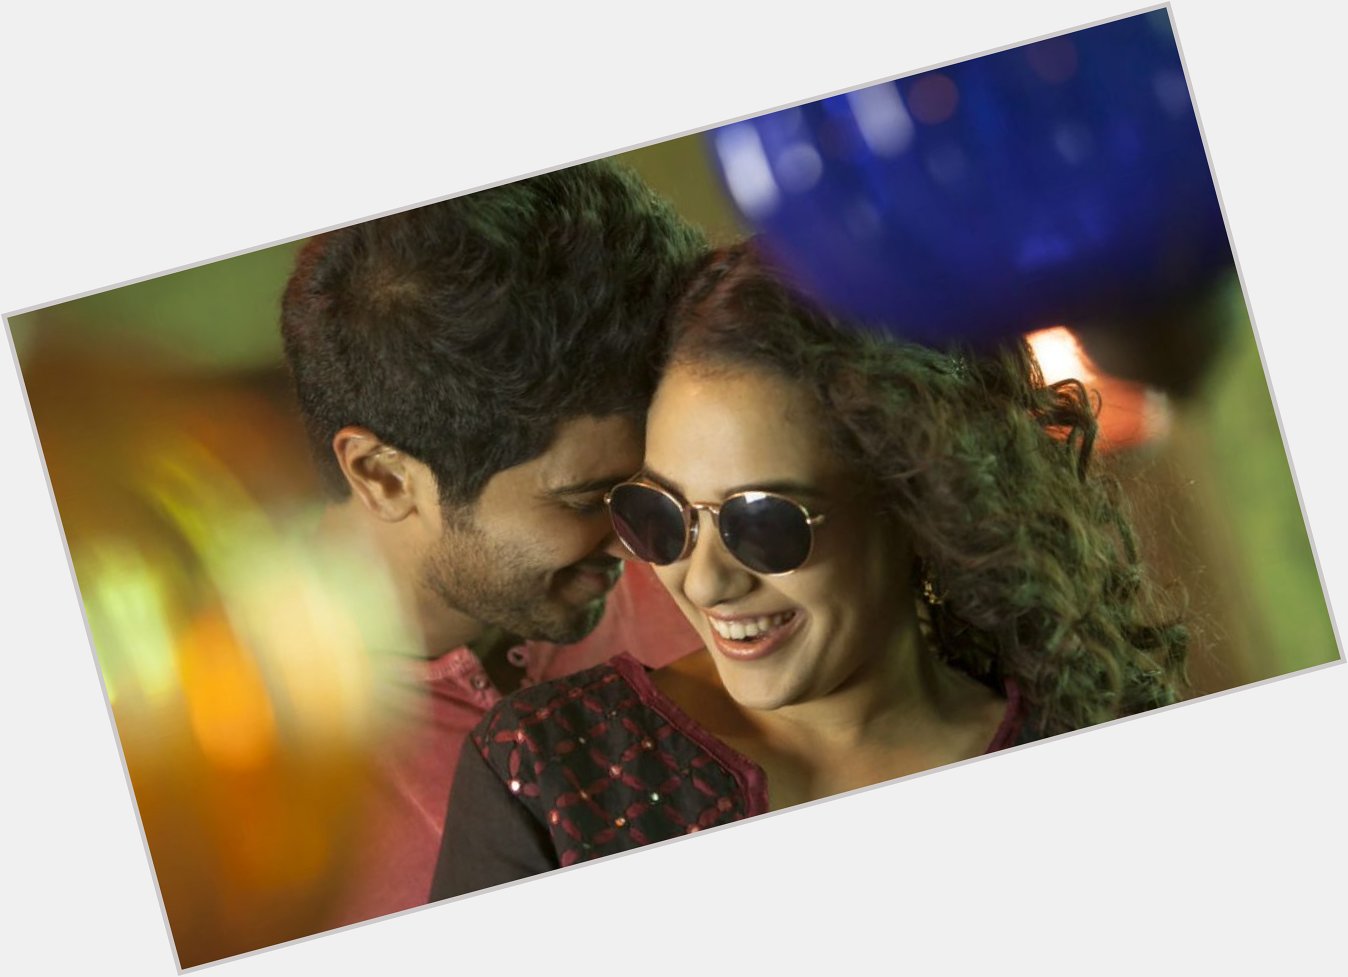 Happy birthday to nithya menen <3
loved her always with dulquer salmaan 